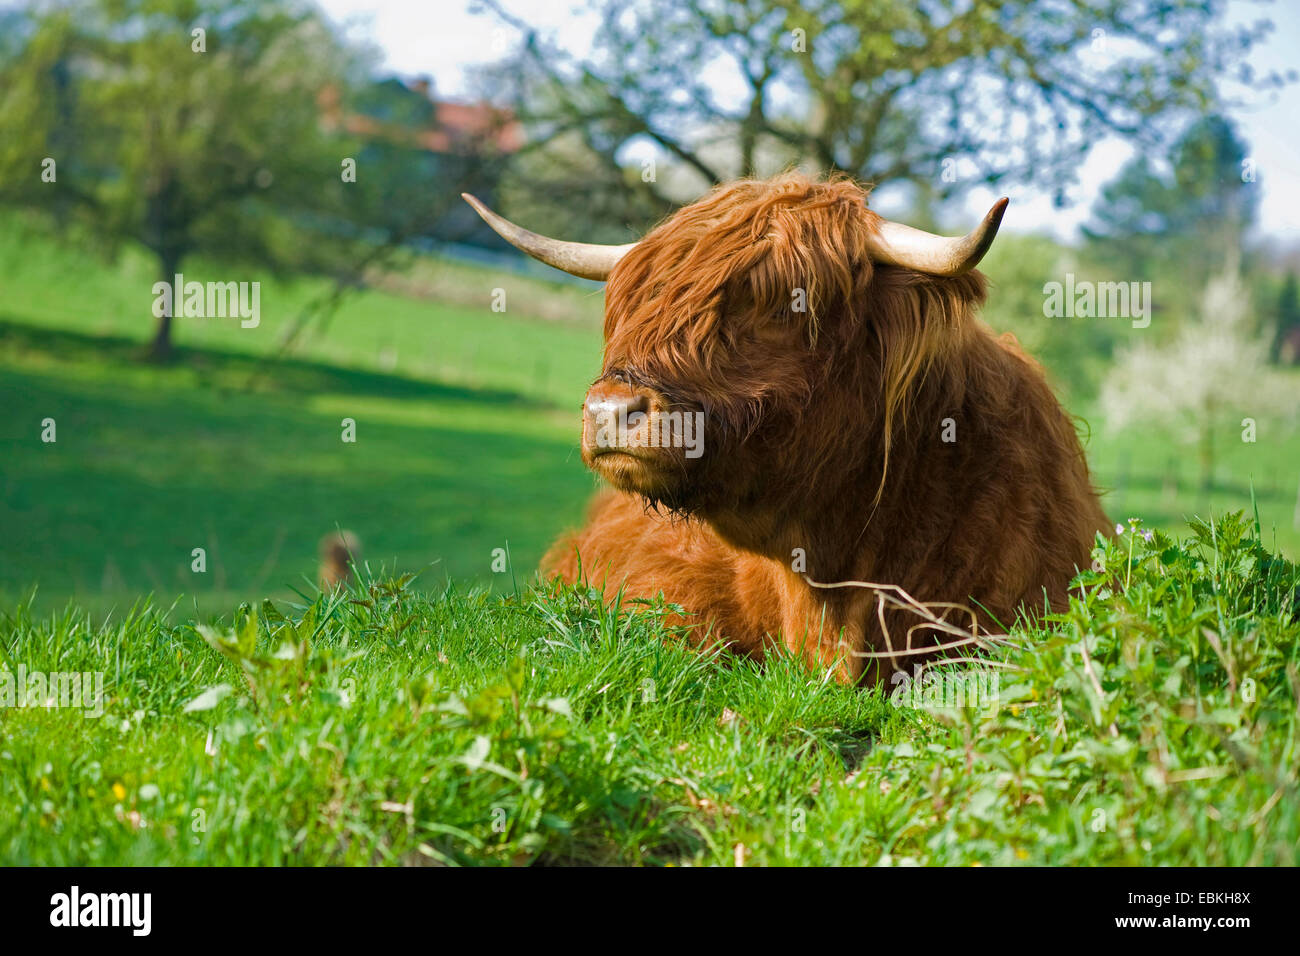 Scottish Highland Cattle (Bos primigenius f. taurus), lying in a meadow Stock Photo